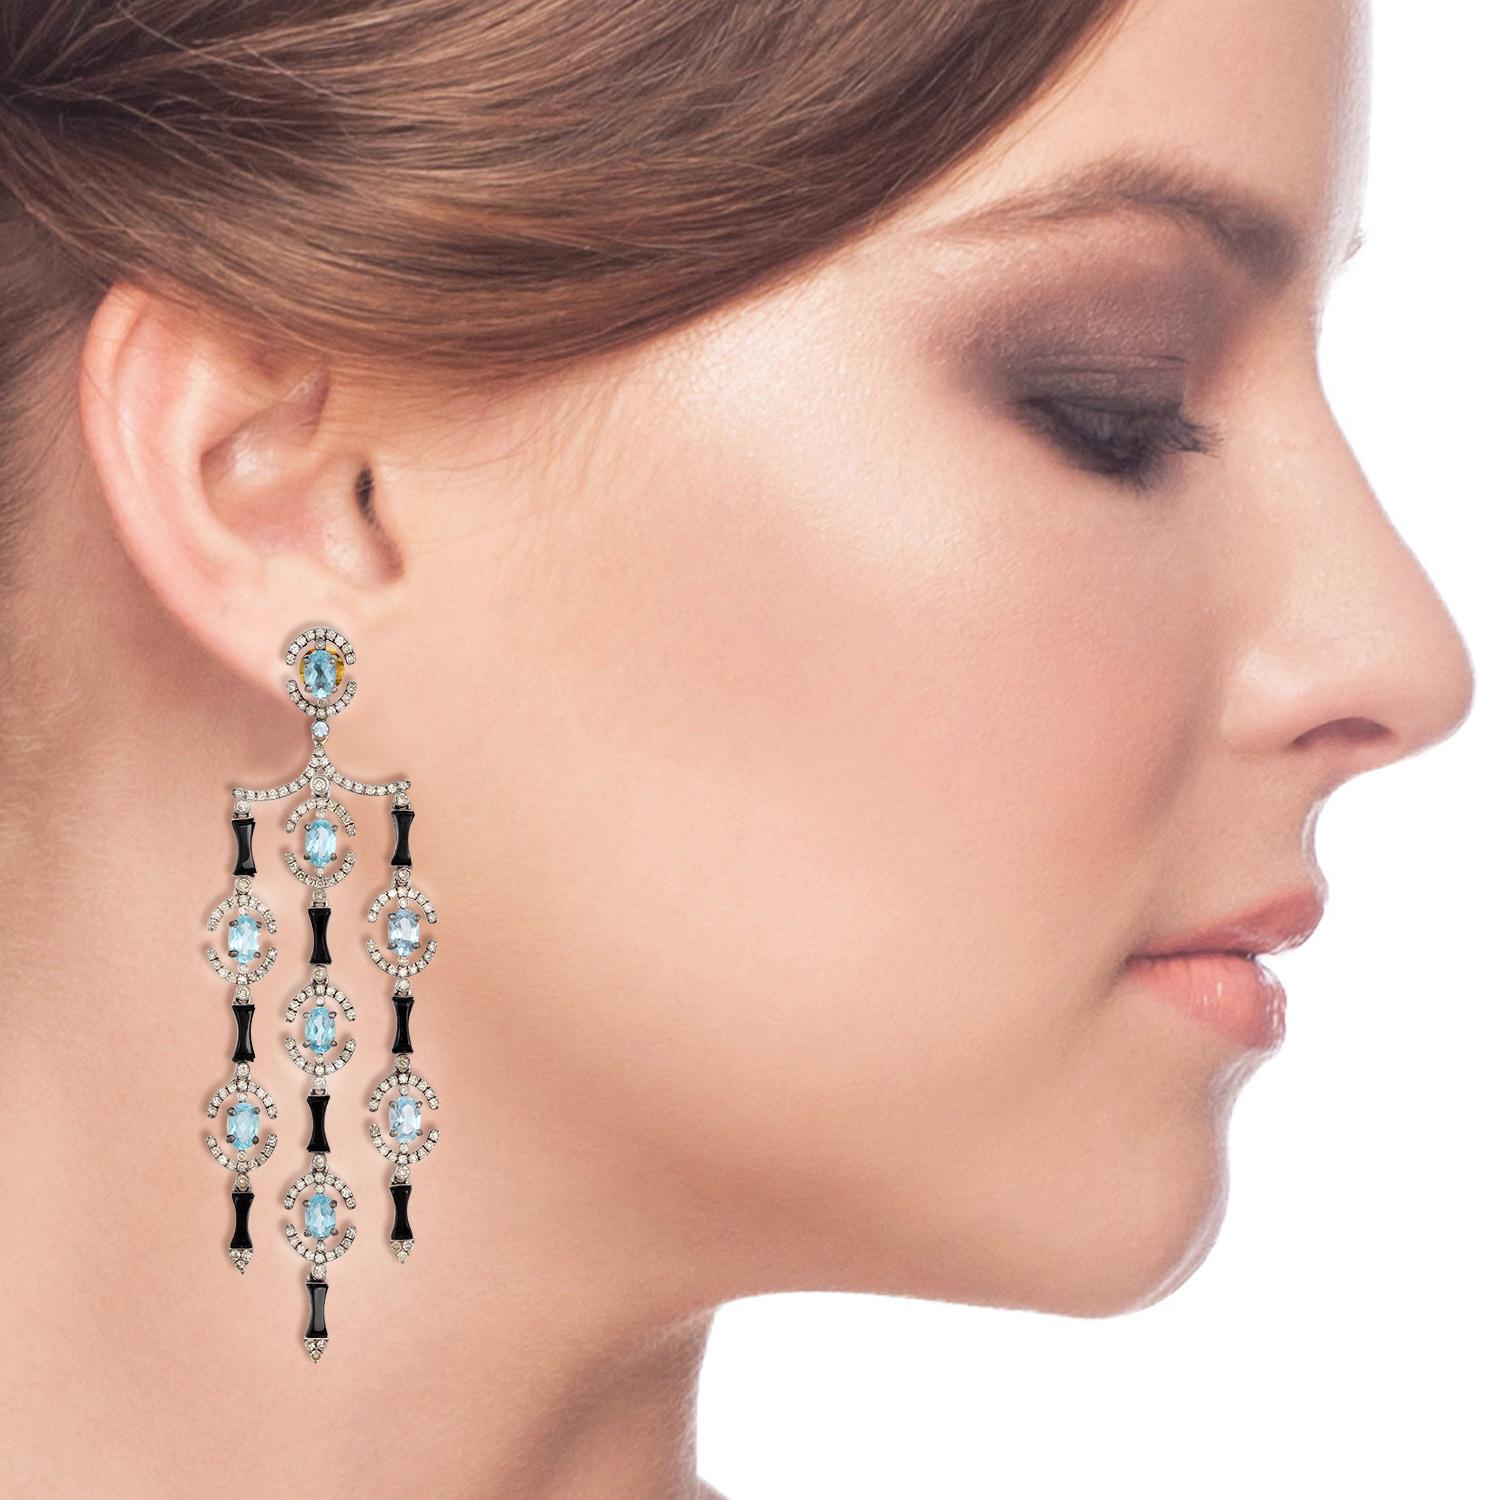 Cast from 18 karat gold & sterling silver, these beautiful earrings are hand set with 10.66 carats Aquamarine, 7.4 carats onyx and 3.49 carats of shimmering diamonds.

FOLLOW  MEGHNA JEWELS storefront to view the latest collection & exclusive